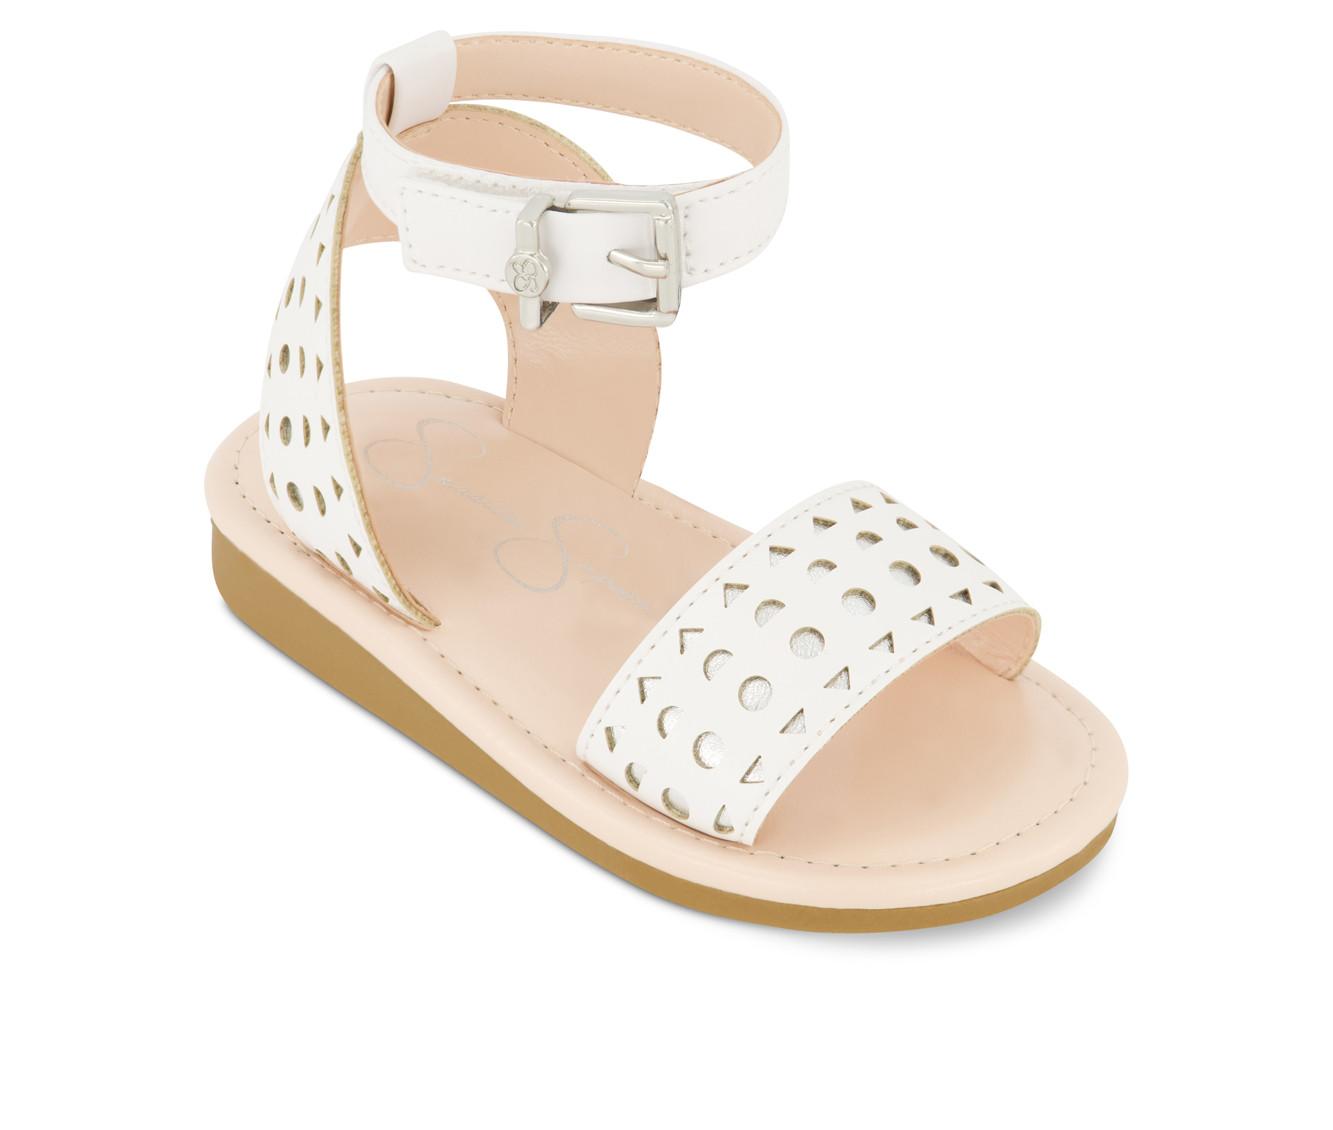 Girls' Jessica Simpson Toddler Janey Perf Sandals